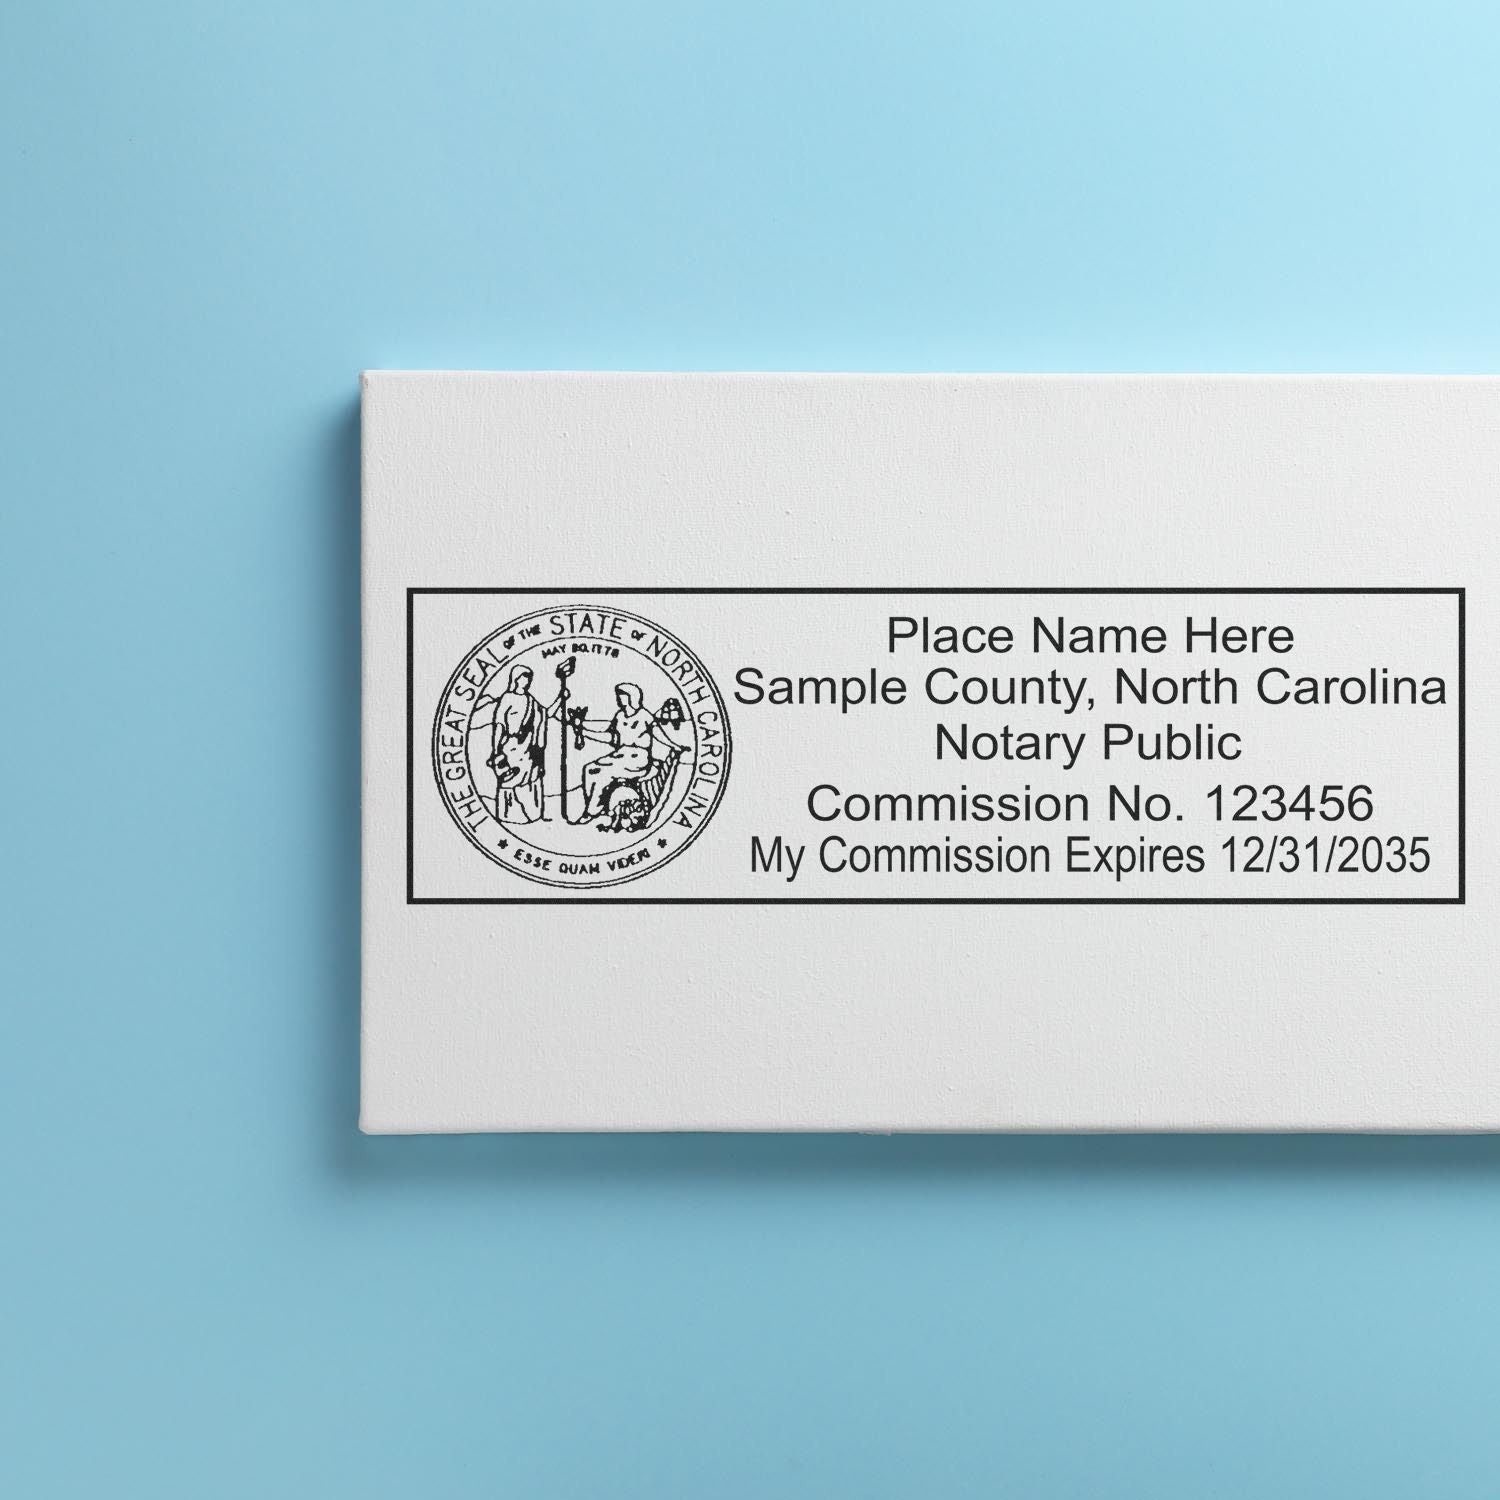 A stamped impression of the Slim Pre-Inked State Seal Notary Stamp for North Carolina in this stylish lifestyle photo, setting the tone for a unique and personalized product.